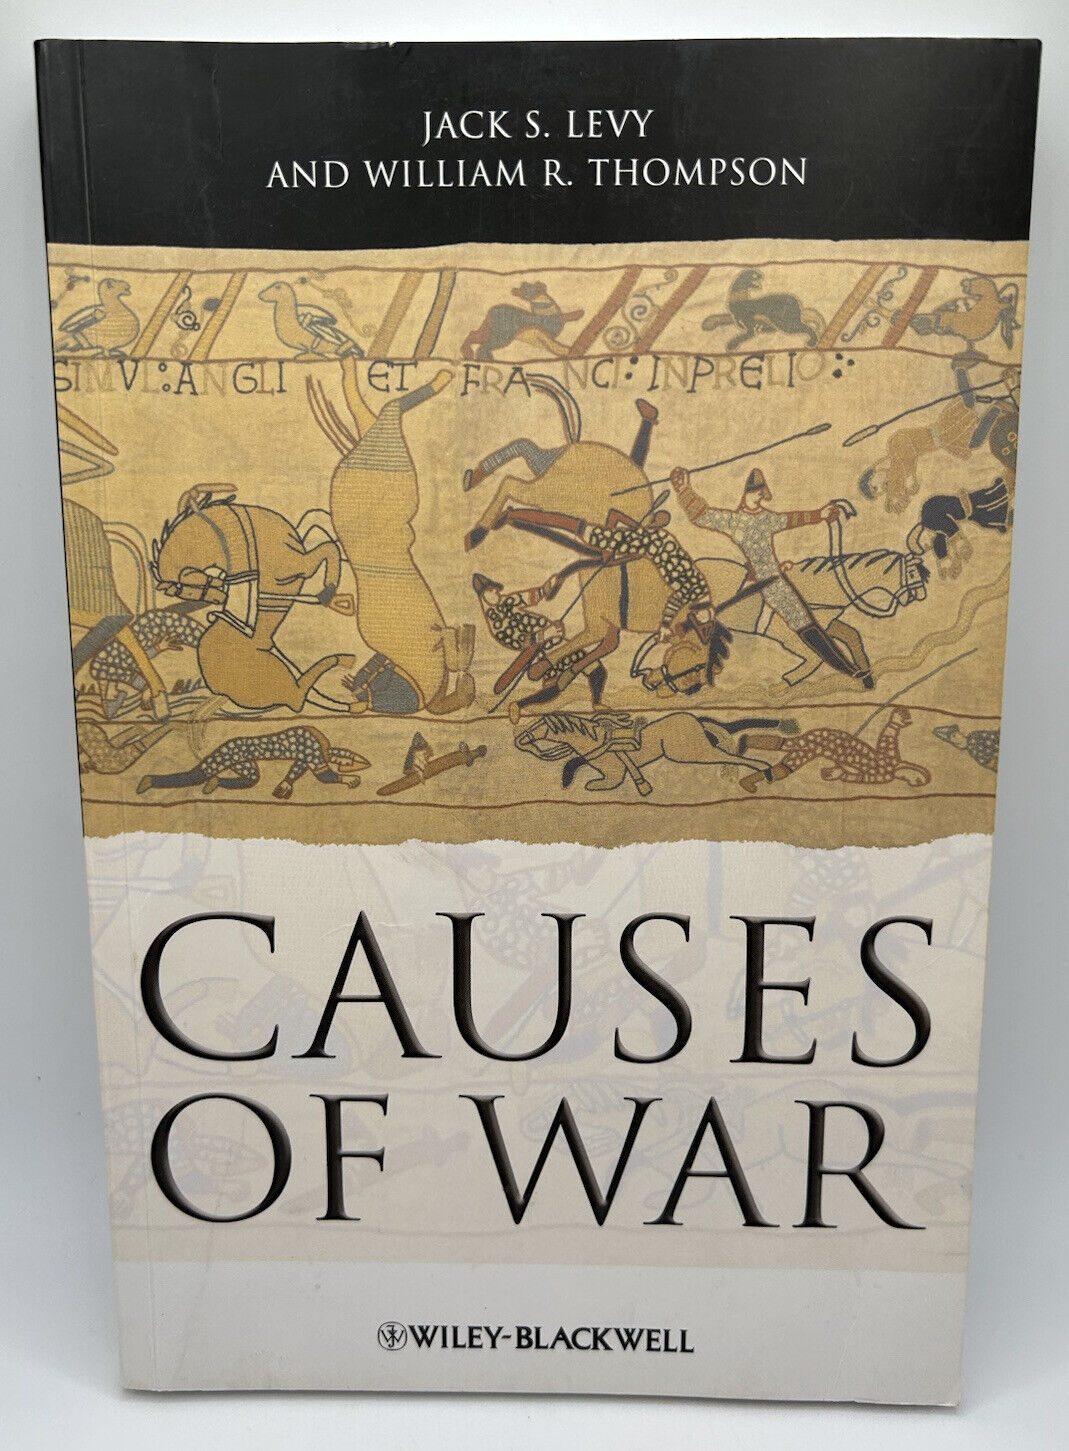 Causes of War by Jack S. Levy and William R. Thompson 2010 Paperback | eBay